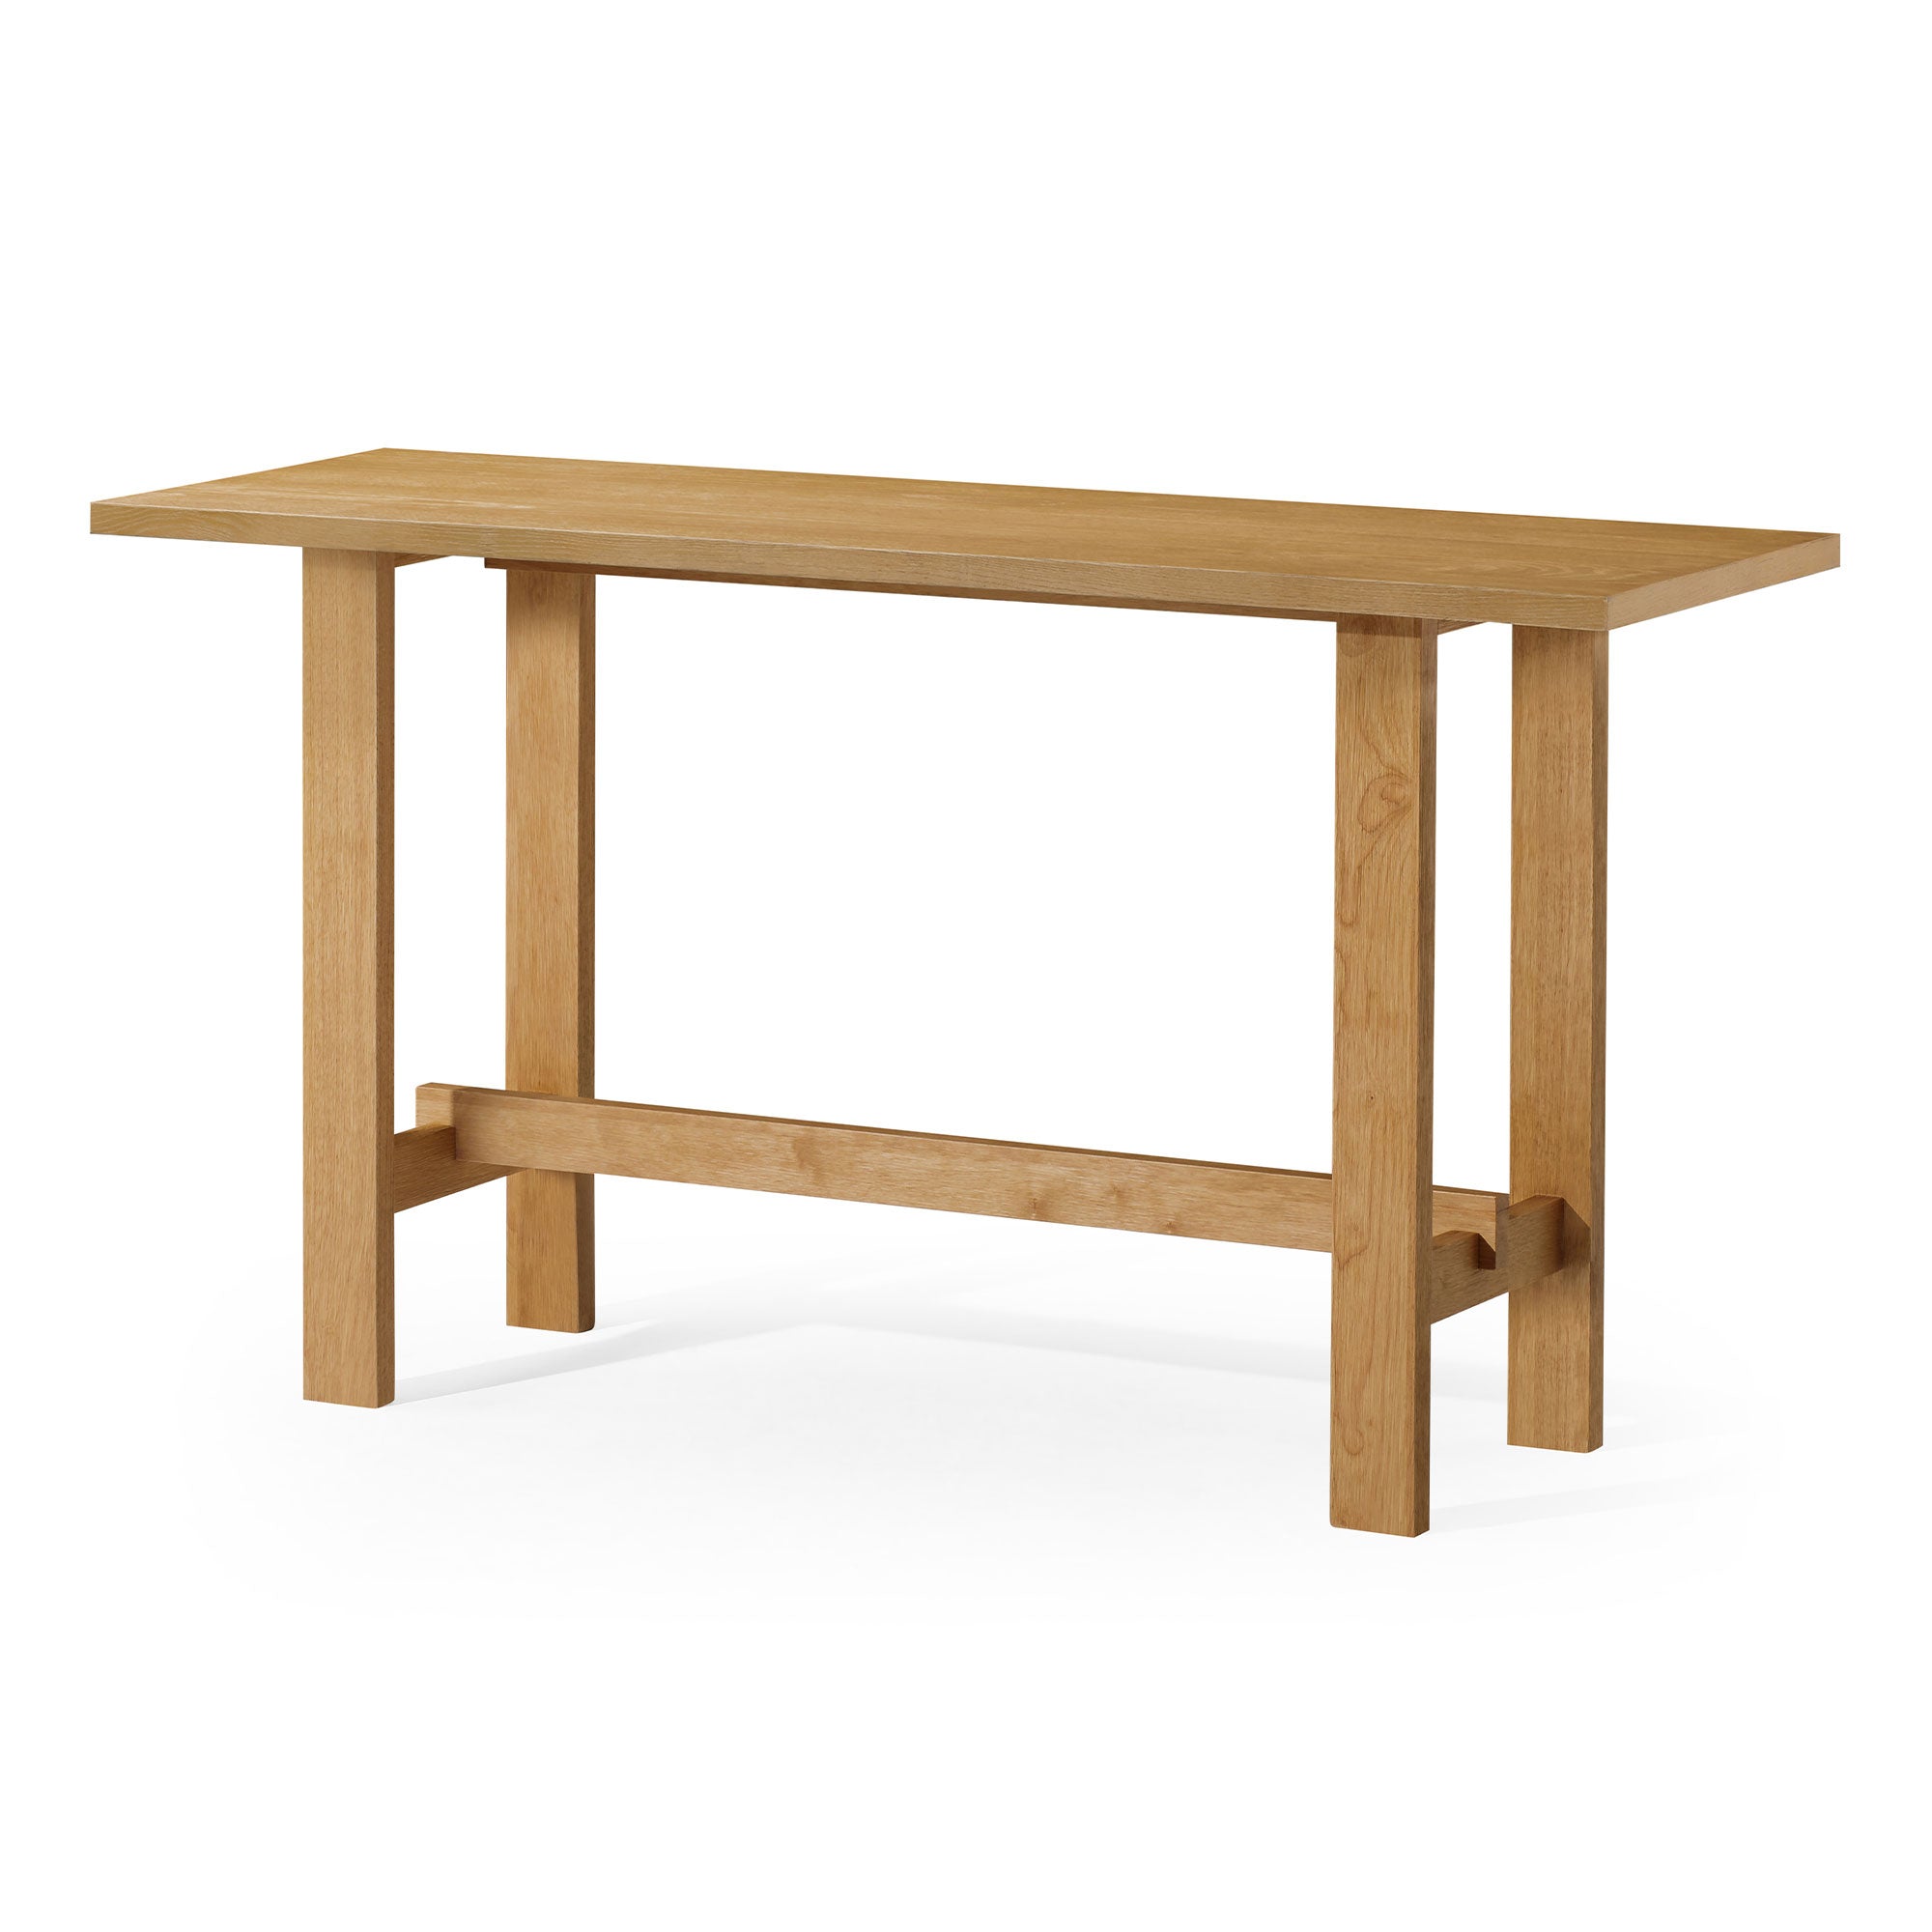 Hera Modern Wooden Console Table in Weathered Natural Finish